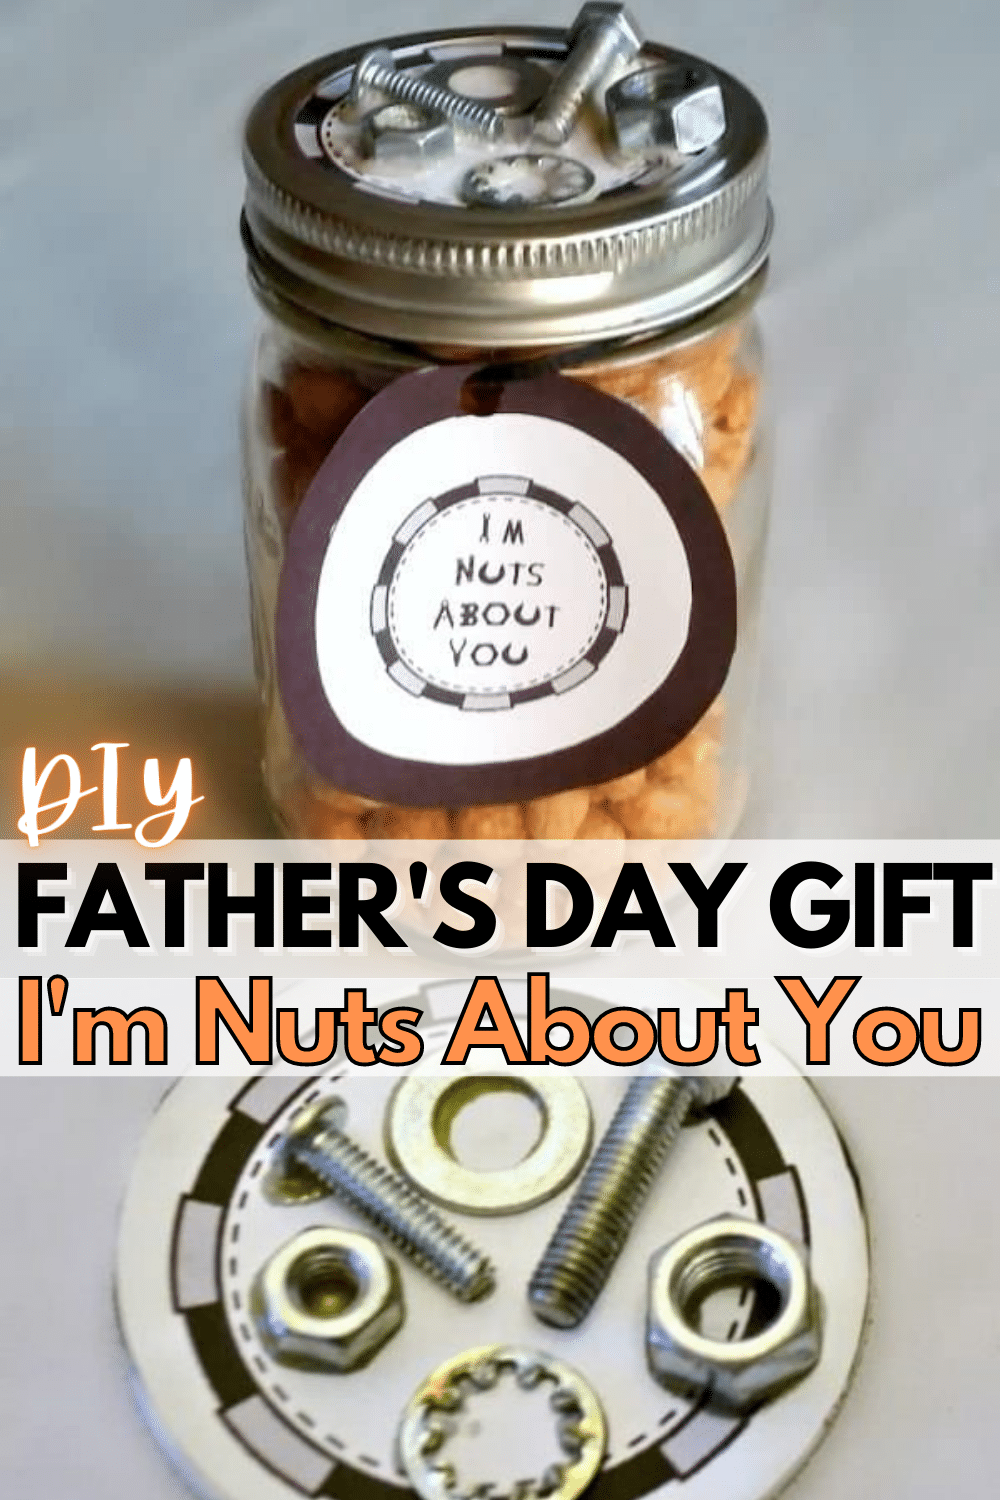 Even if you're not much of a crafter, you can make this easy gift. It's a fun DIY Father's Day gift that tells your husband "I'm Nuts About You!" #diy #fathersday #fathersdaygift via @wondermomwannab